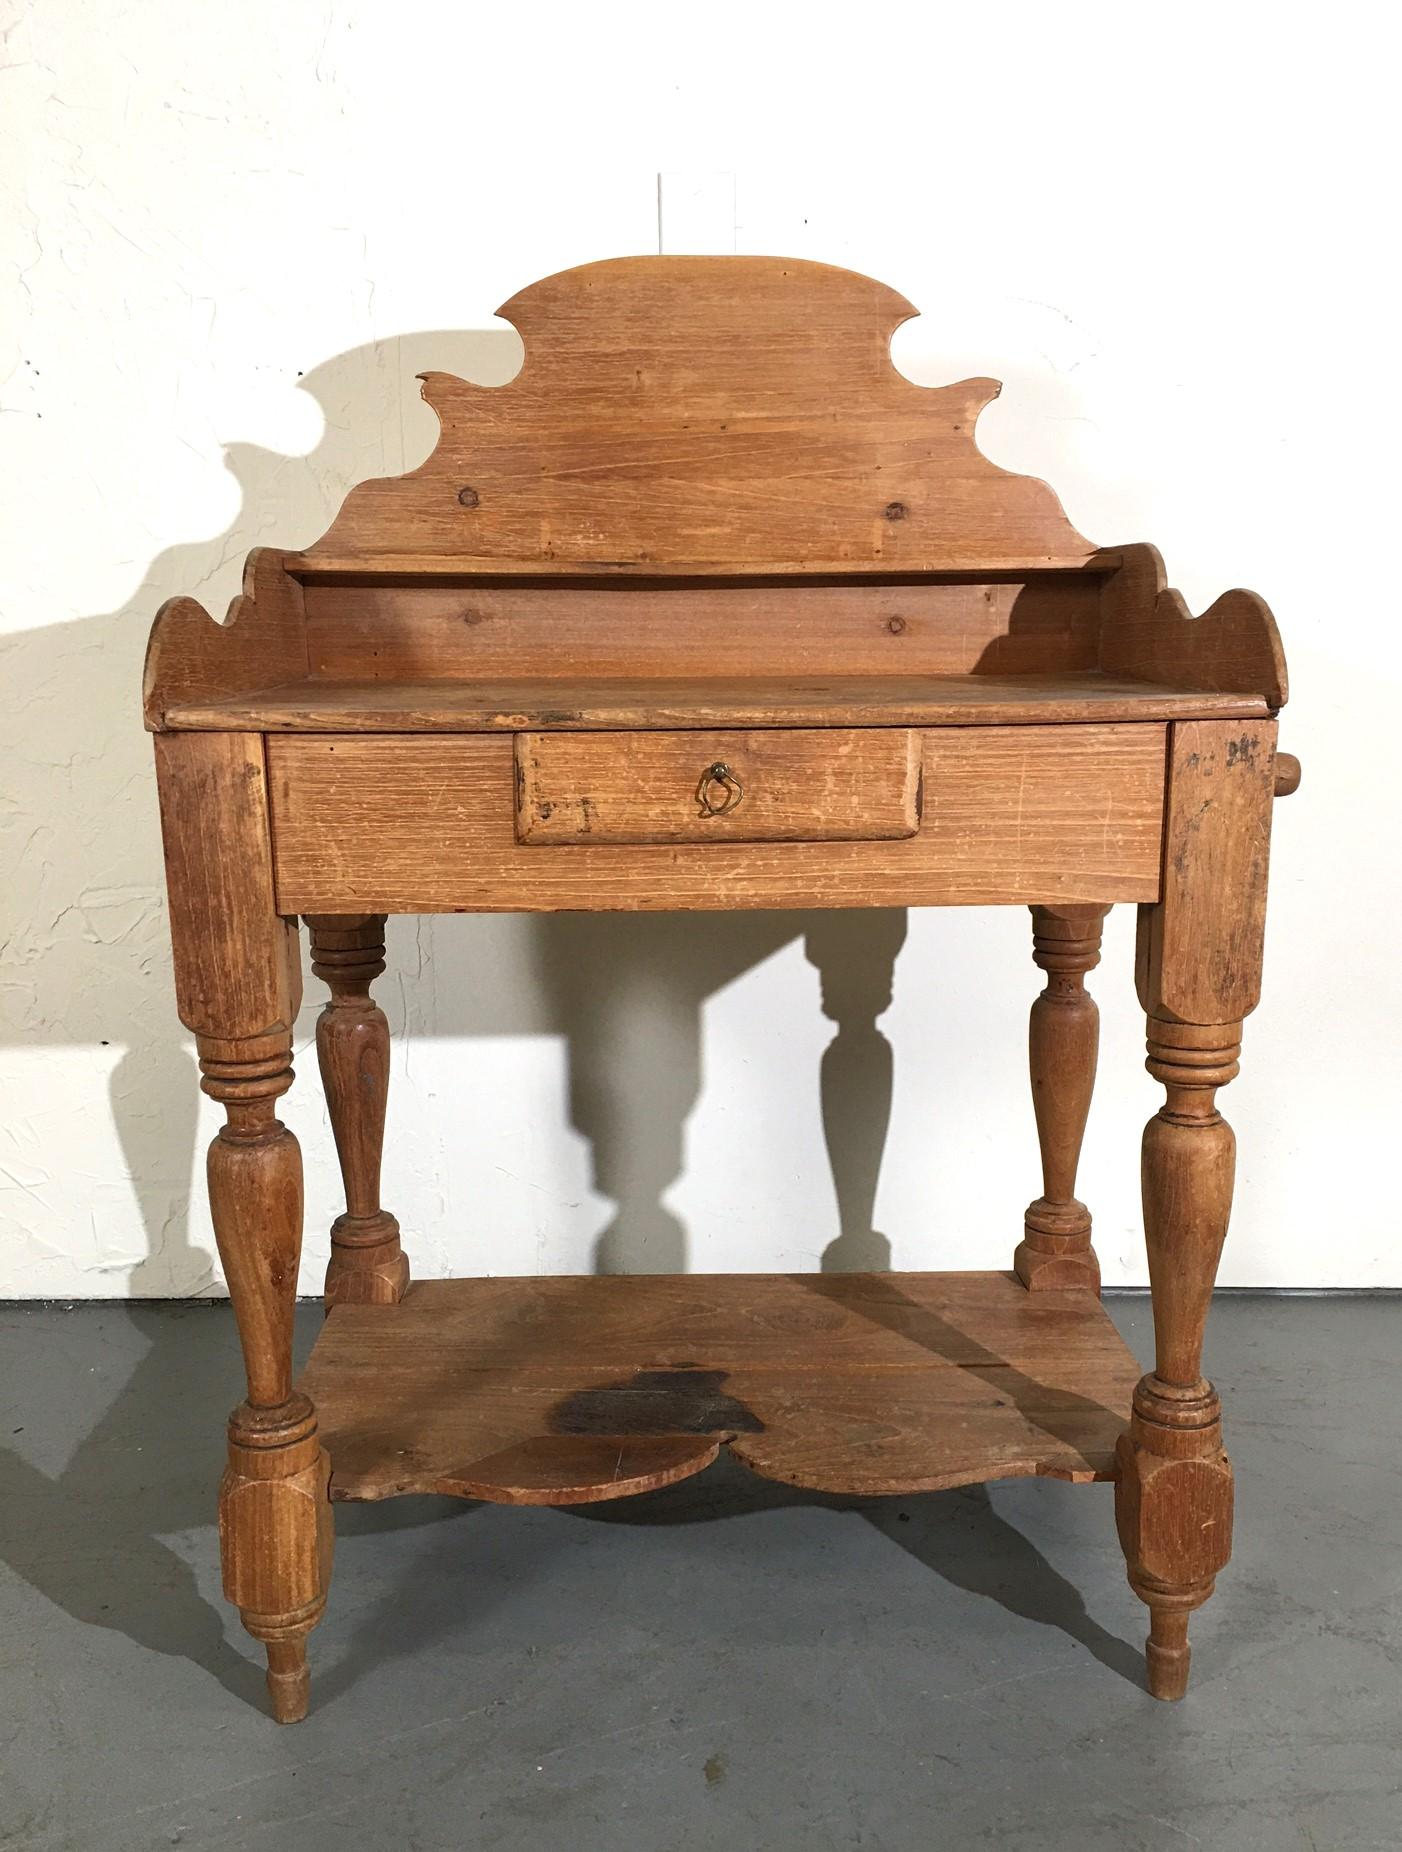 19th-century English washstand. A single drawer and towel bar on the side.